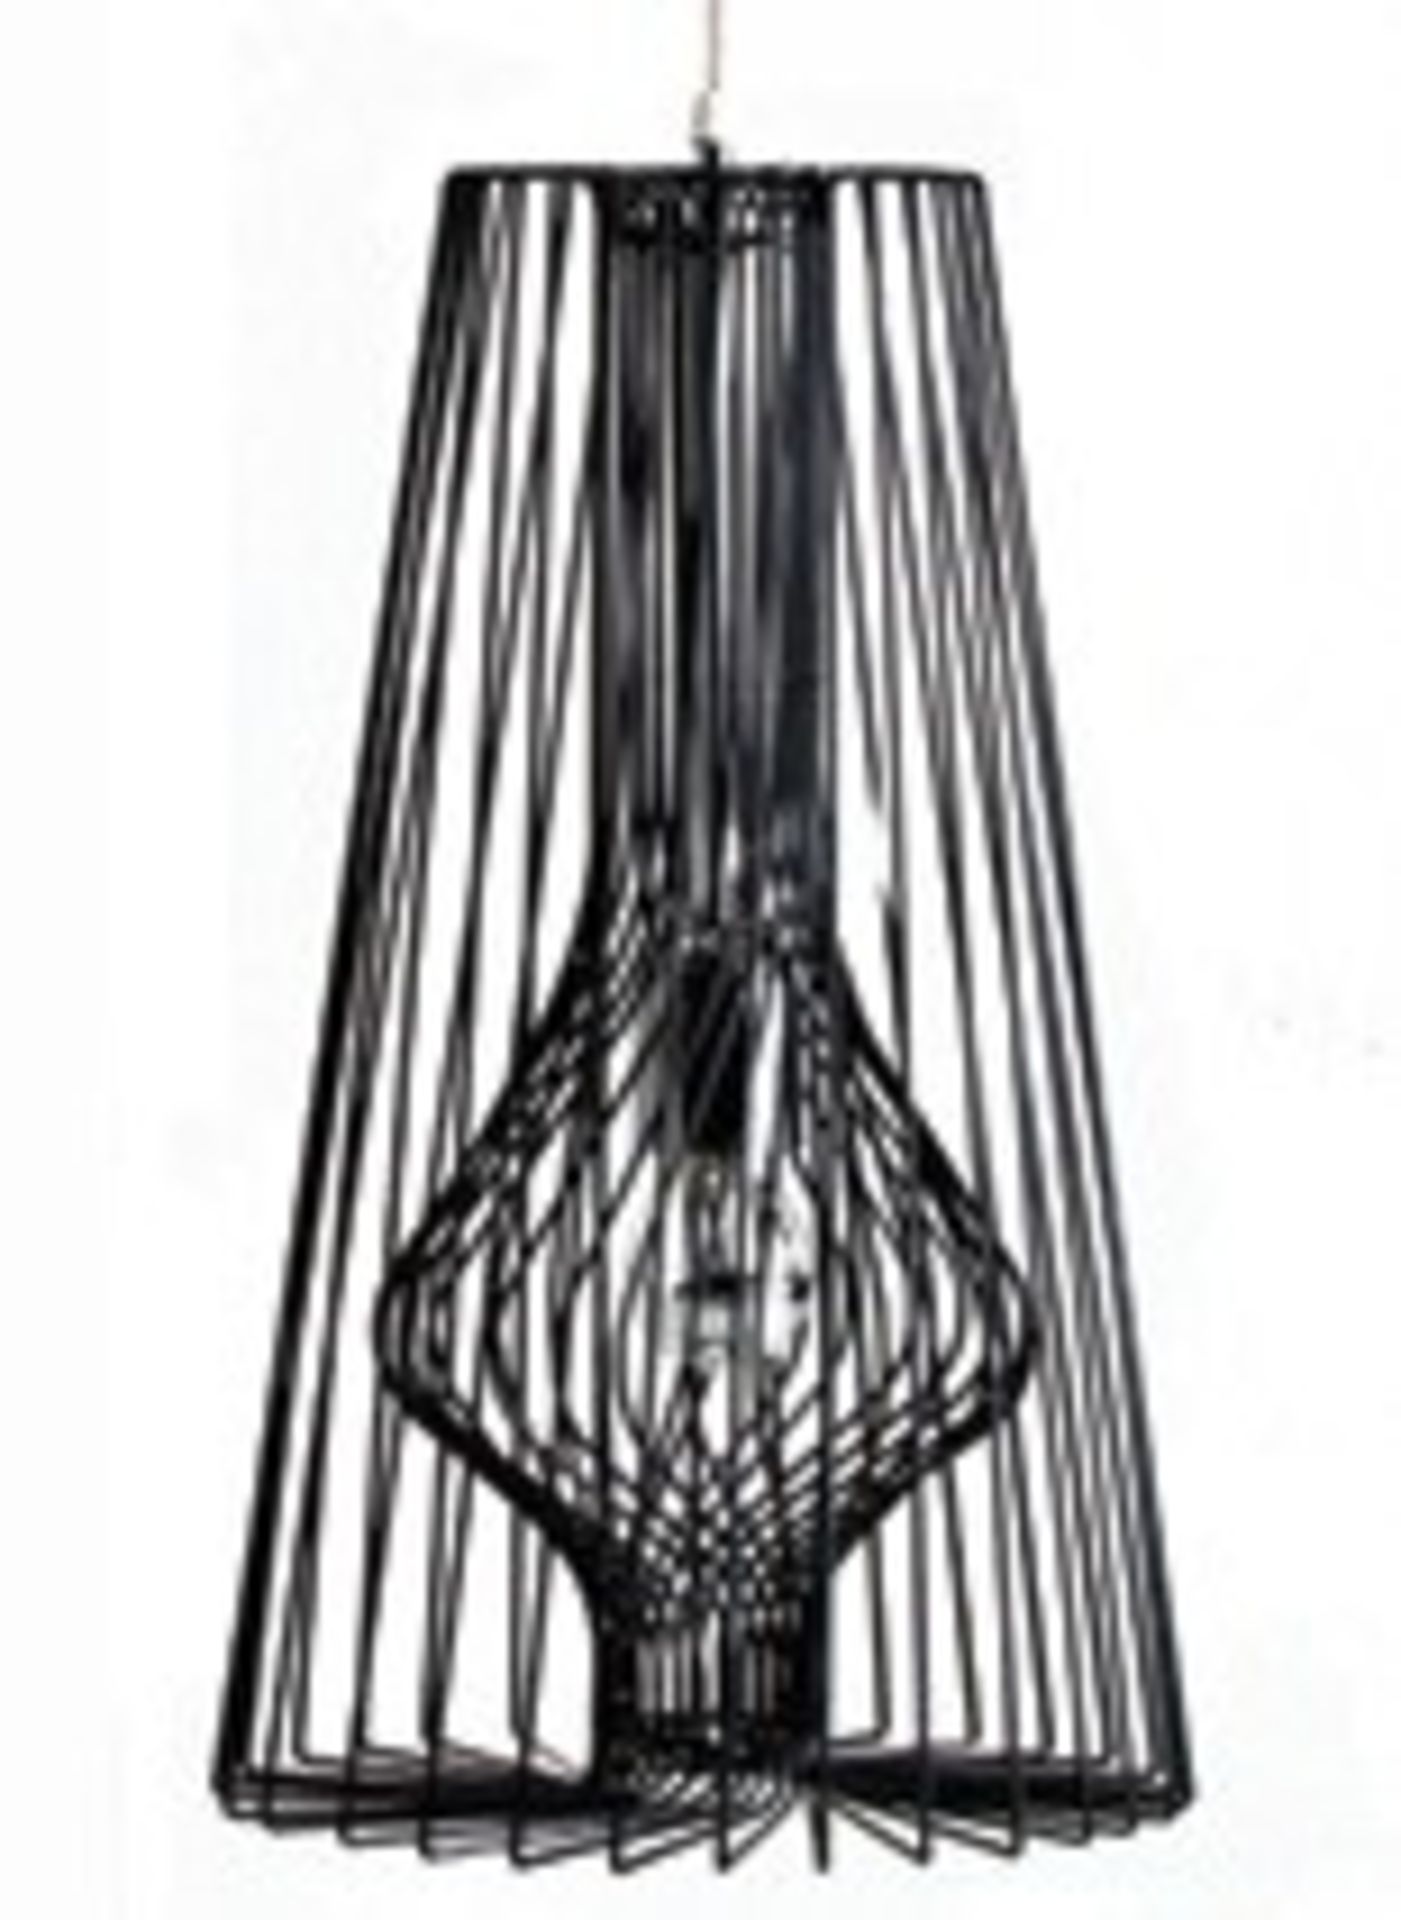 1 x "WIRE" Designer Pendant Light By Decode London - Colour: Black - Recently Removed From An - Image 2 of 6